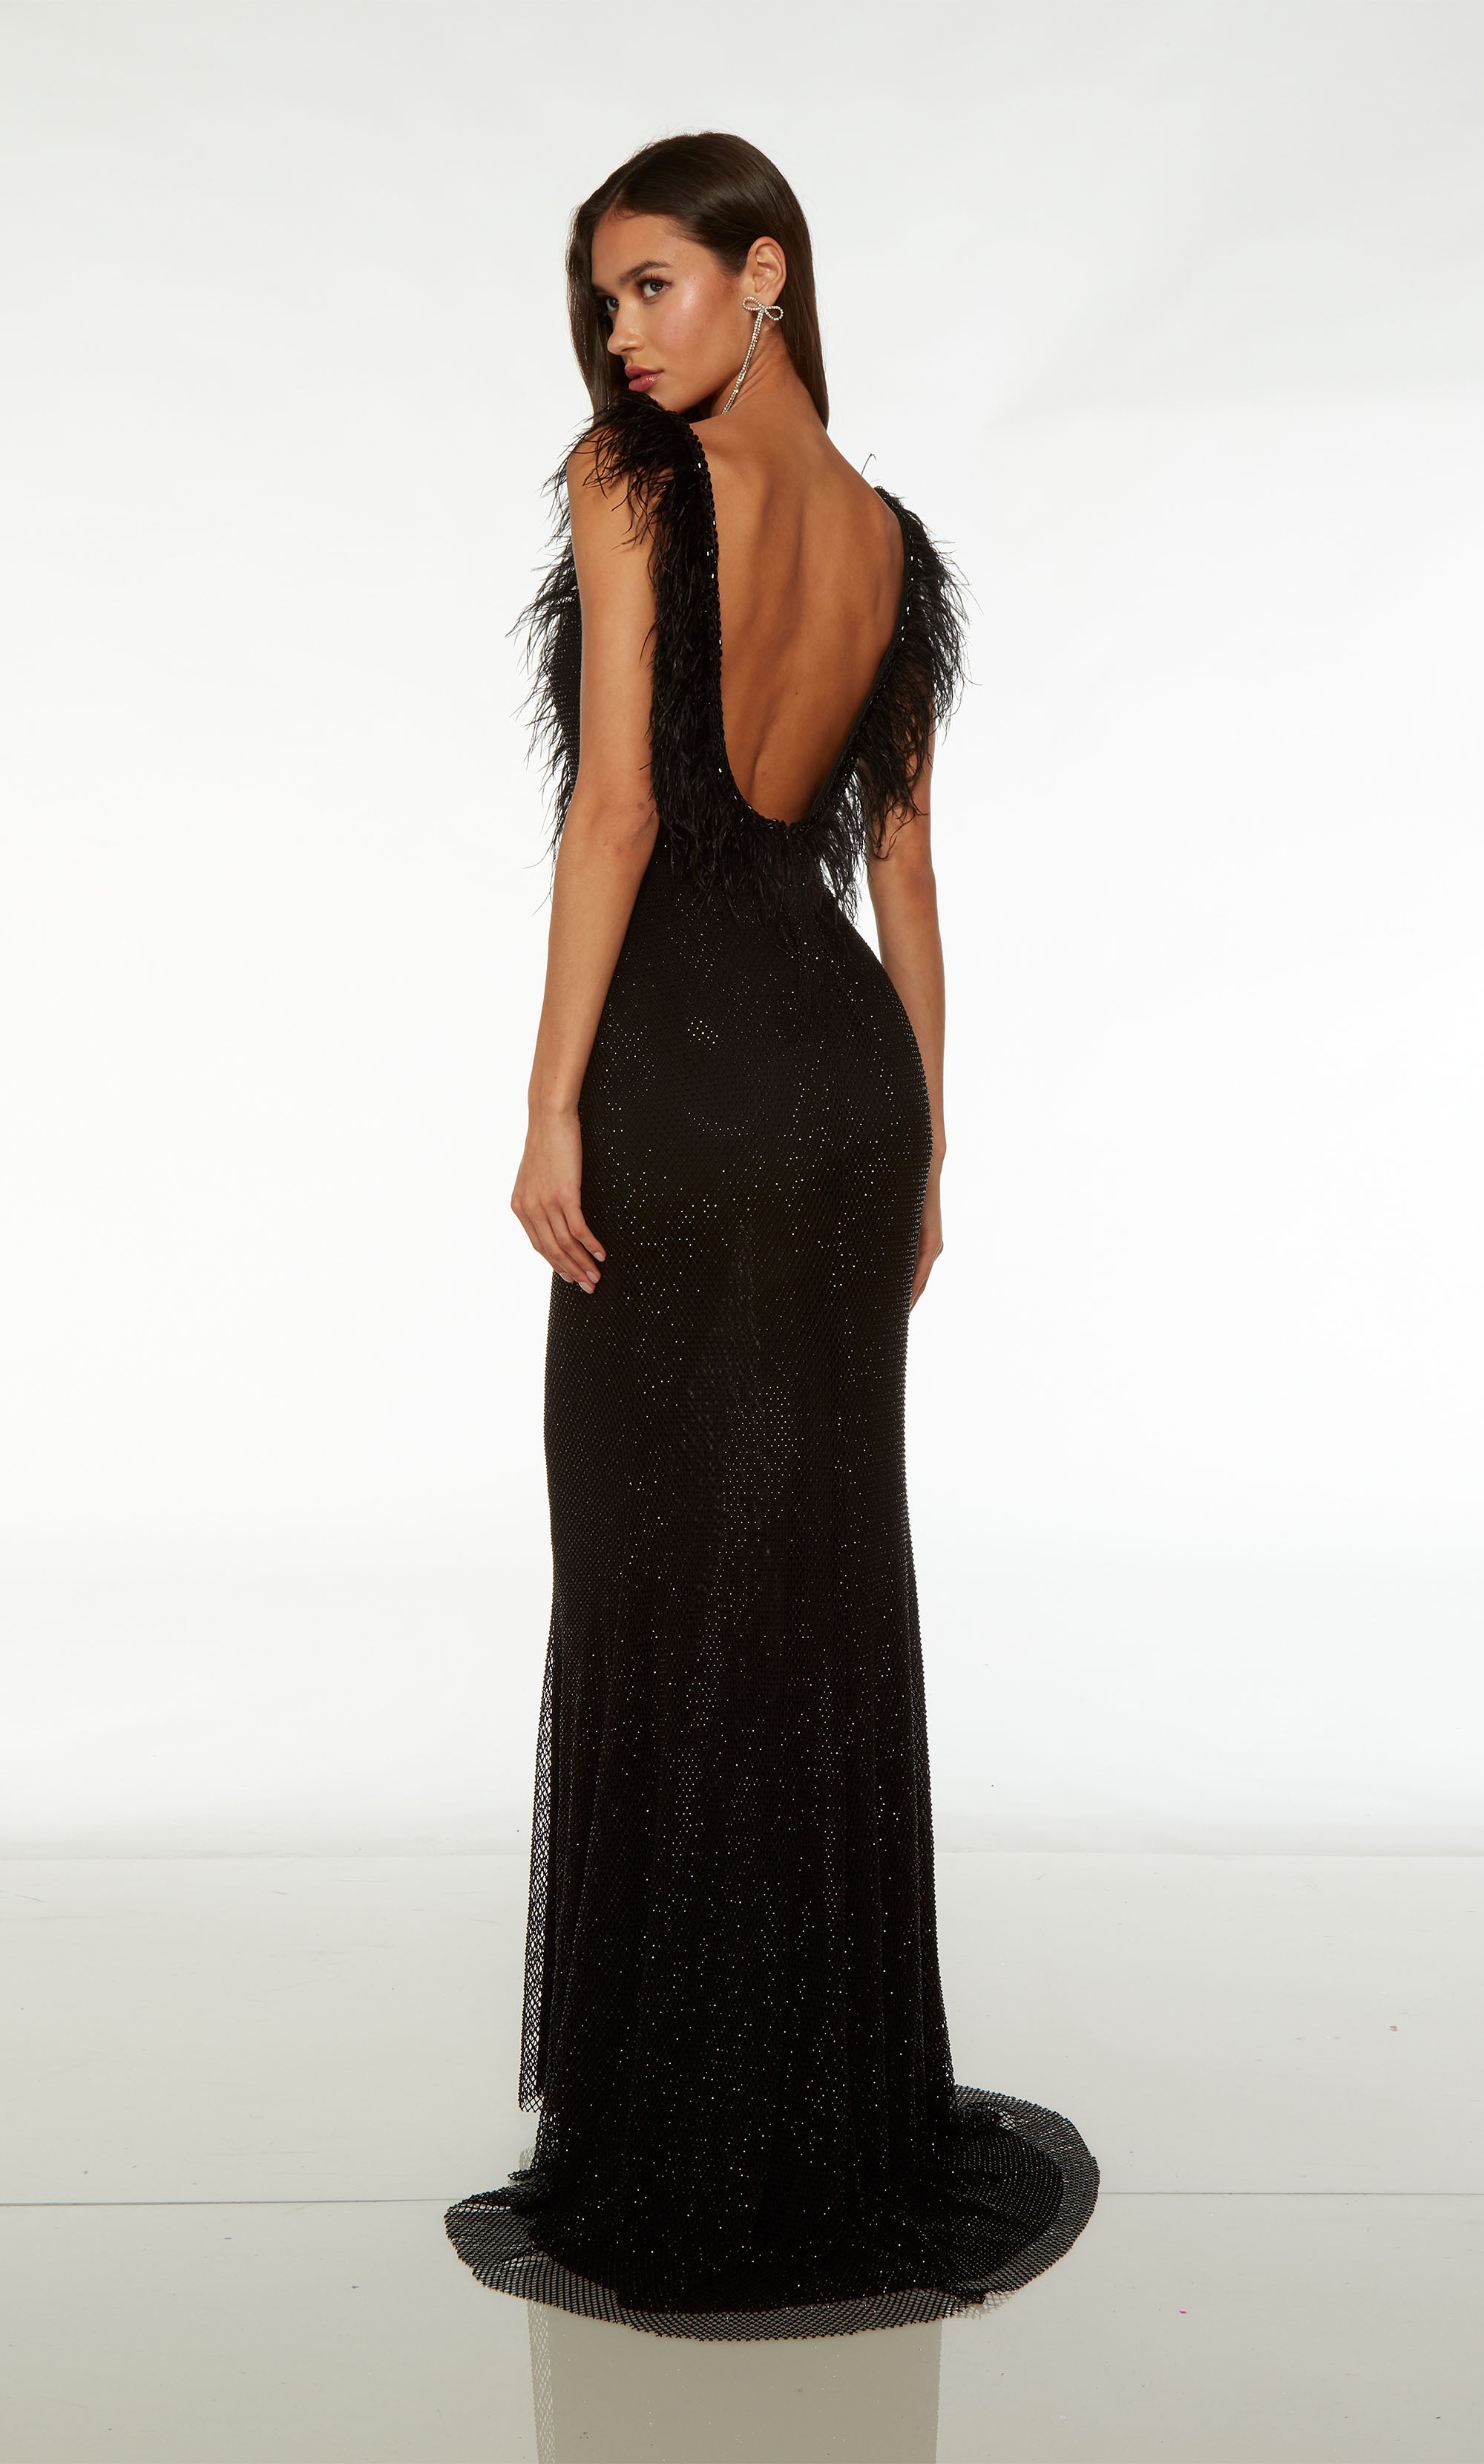 Chic black hotfix formal dress with plunging neckline, low back, train, and exquisite bead and feather trim for added elegance.